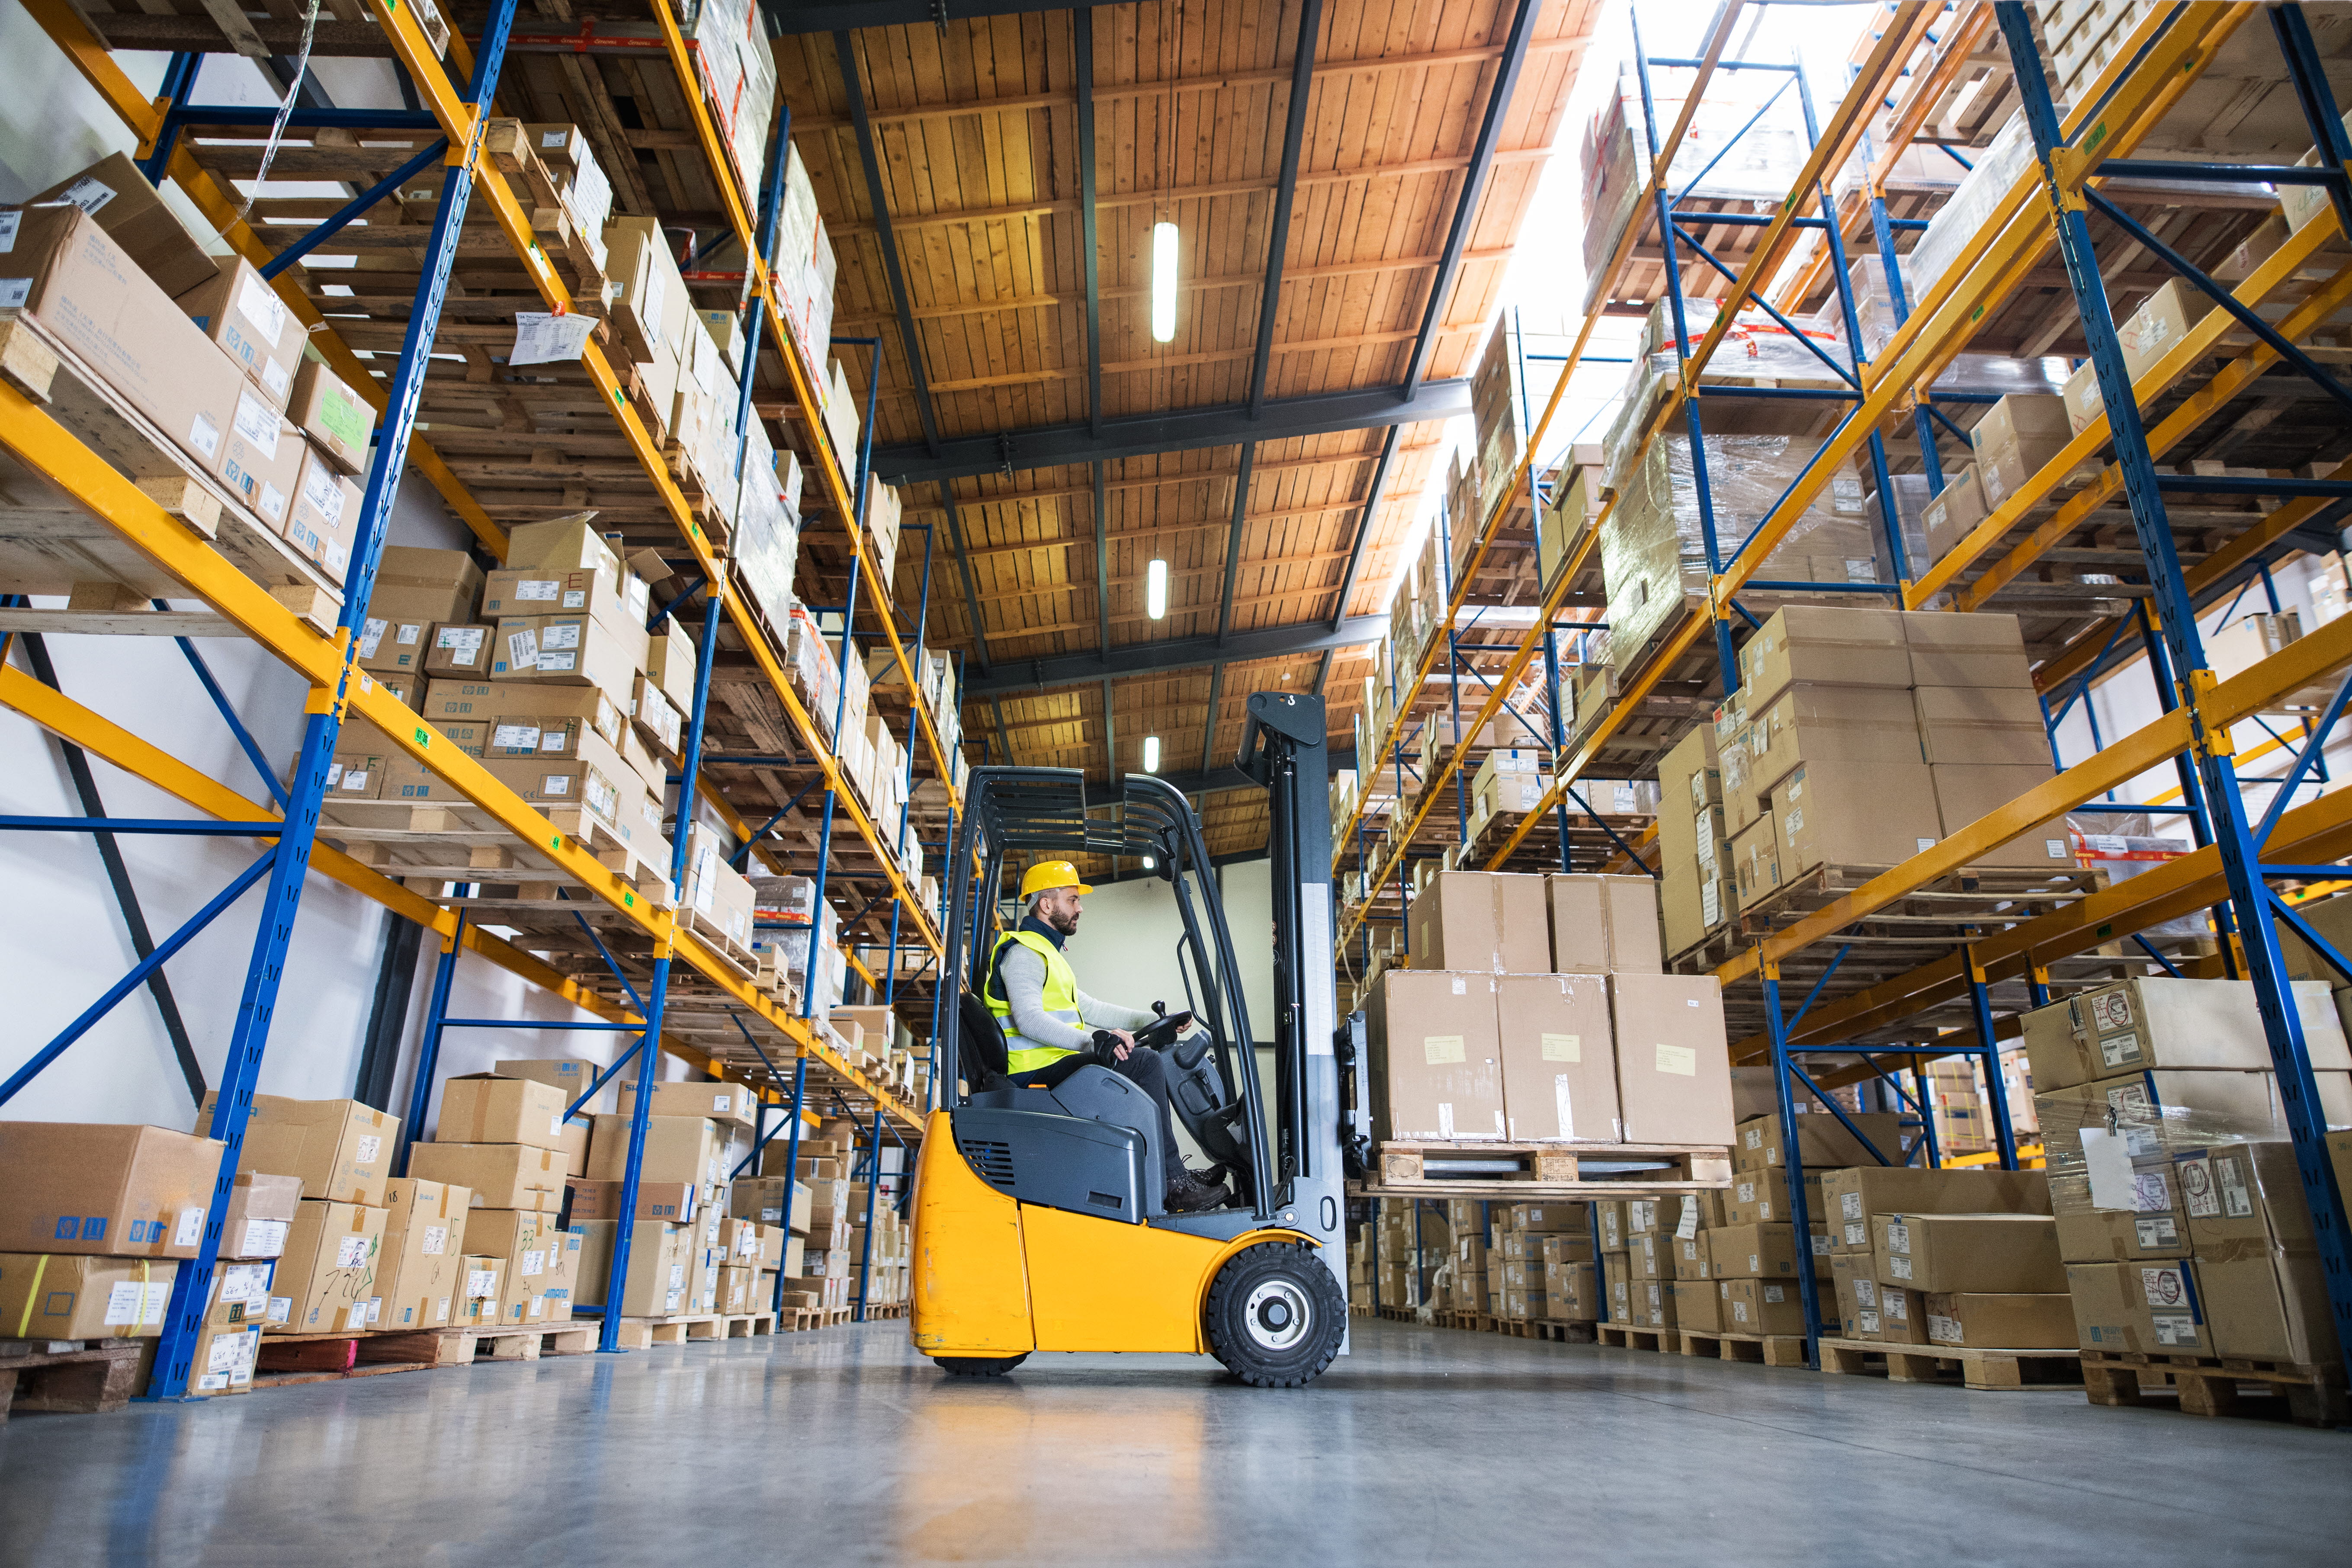 A man is driving a forklift in a warehouse.